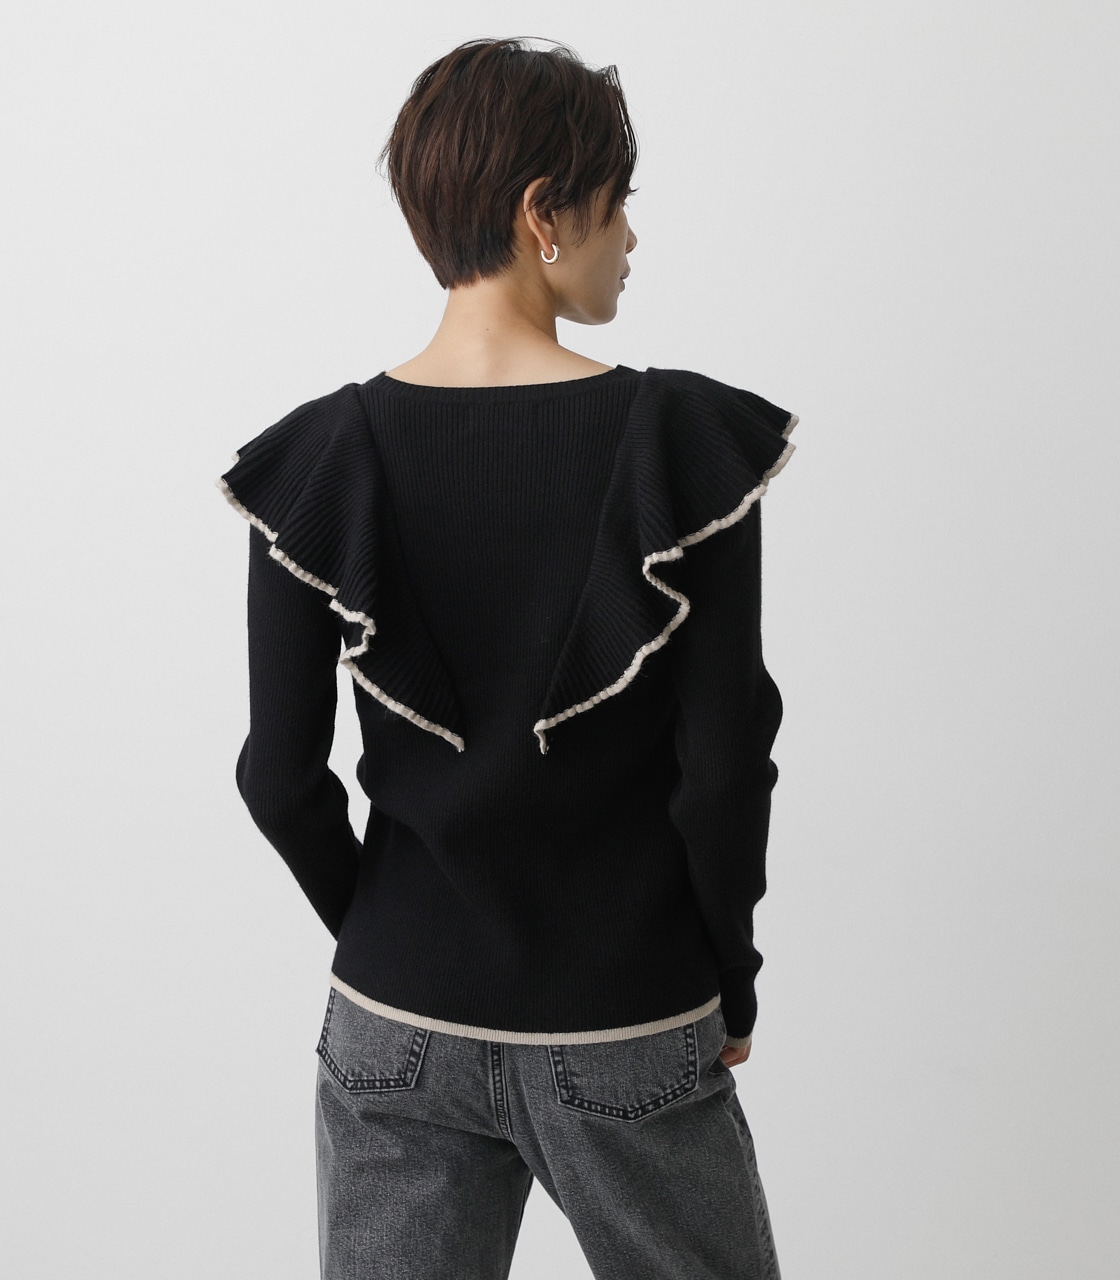 FRONT FRILLED KNIT TOPS/フロントフリルニットトップス 詳細画像 BLK 7